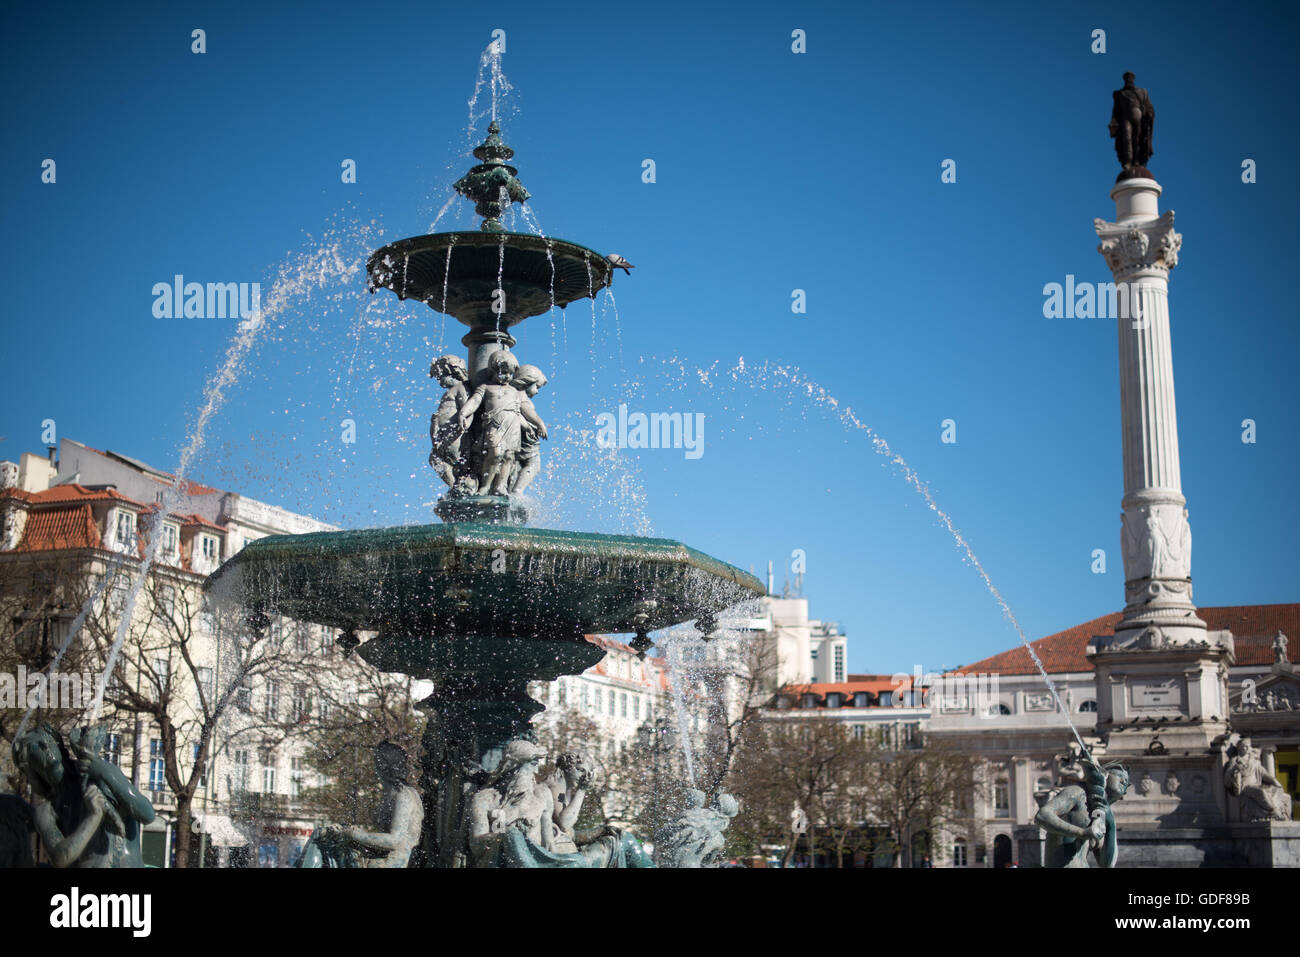 LISBON, Portugal - Formally known as Pedro IV Square (or Praça de D. Pedro IV in Portuguese), Rossio Square has been a vibrant public commons in Lisbon for centuries. At its center stands a column topped with a statue of King Pedro IV (Peter IV; 1798-1834) that was erected in 1870. Stock Photo